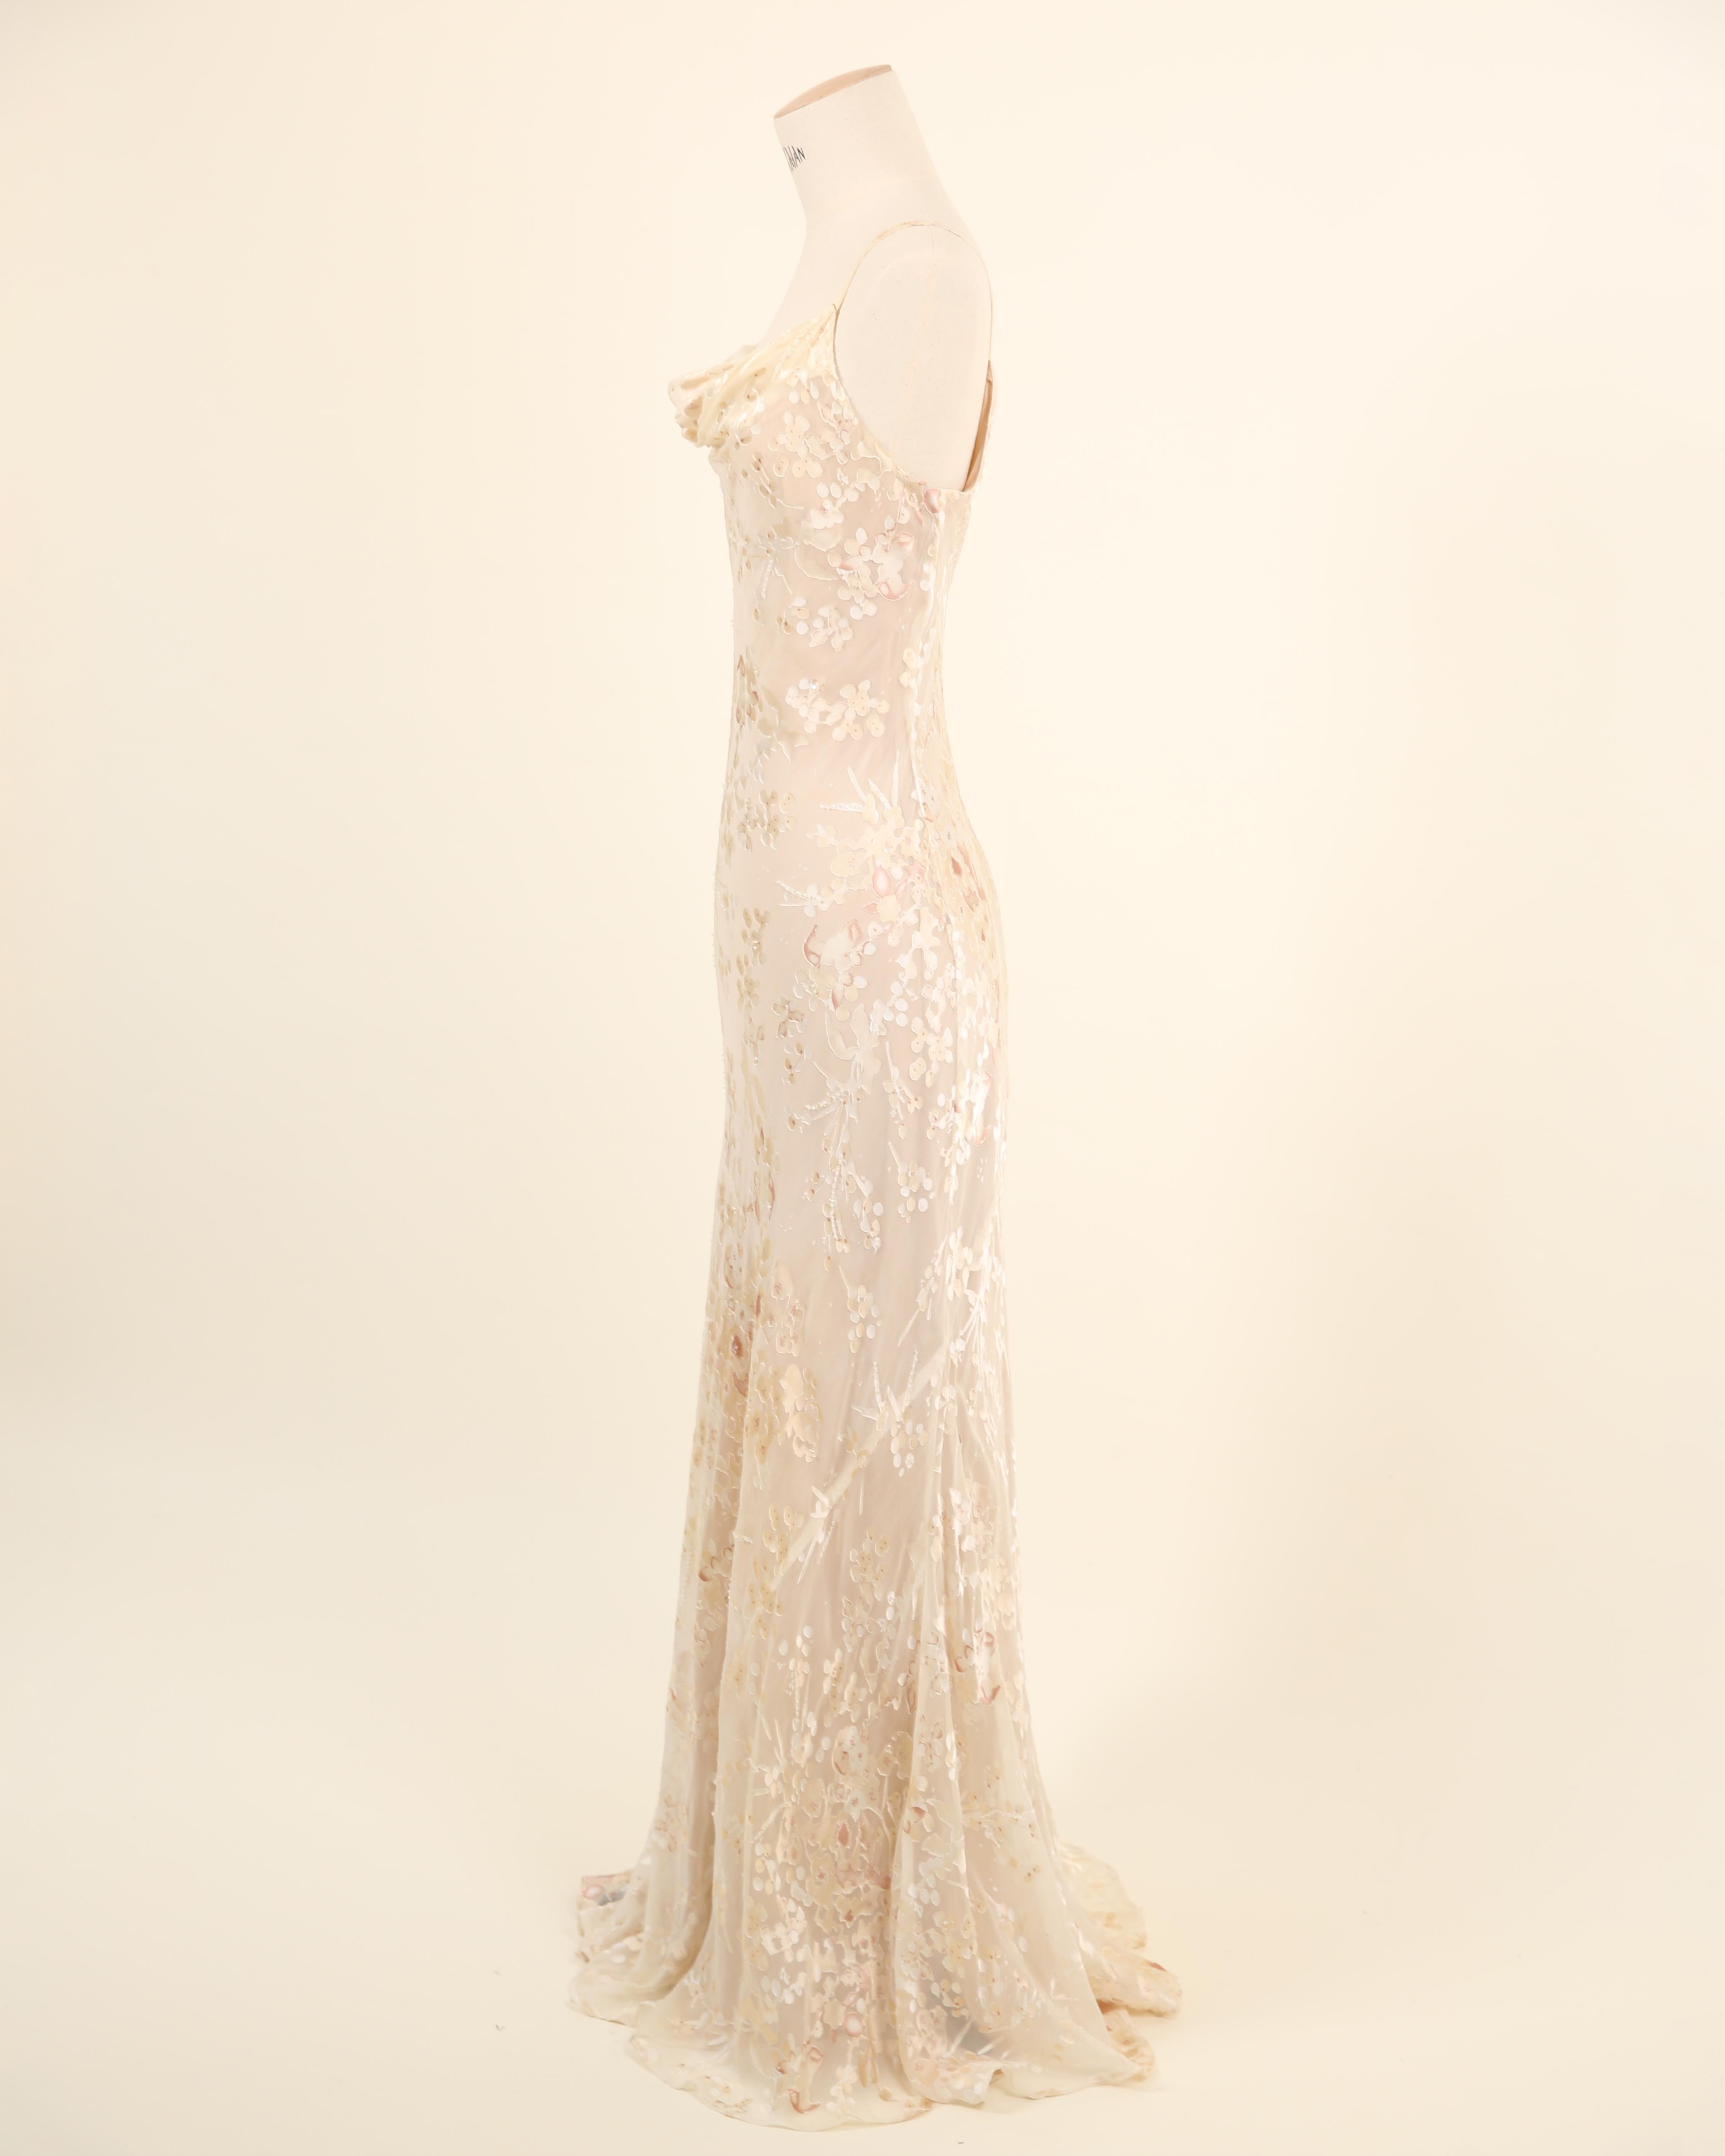 Vintage nude ivory beaded silk sheer floral layered wedding slip dress gown M L 1